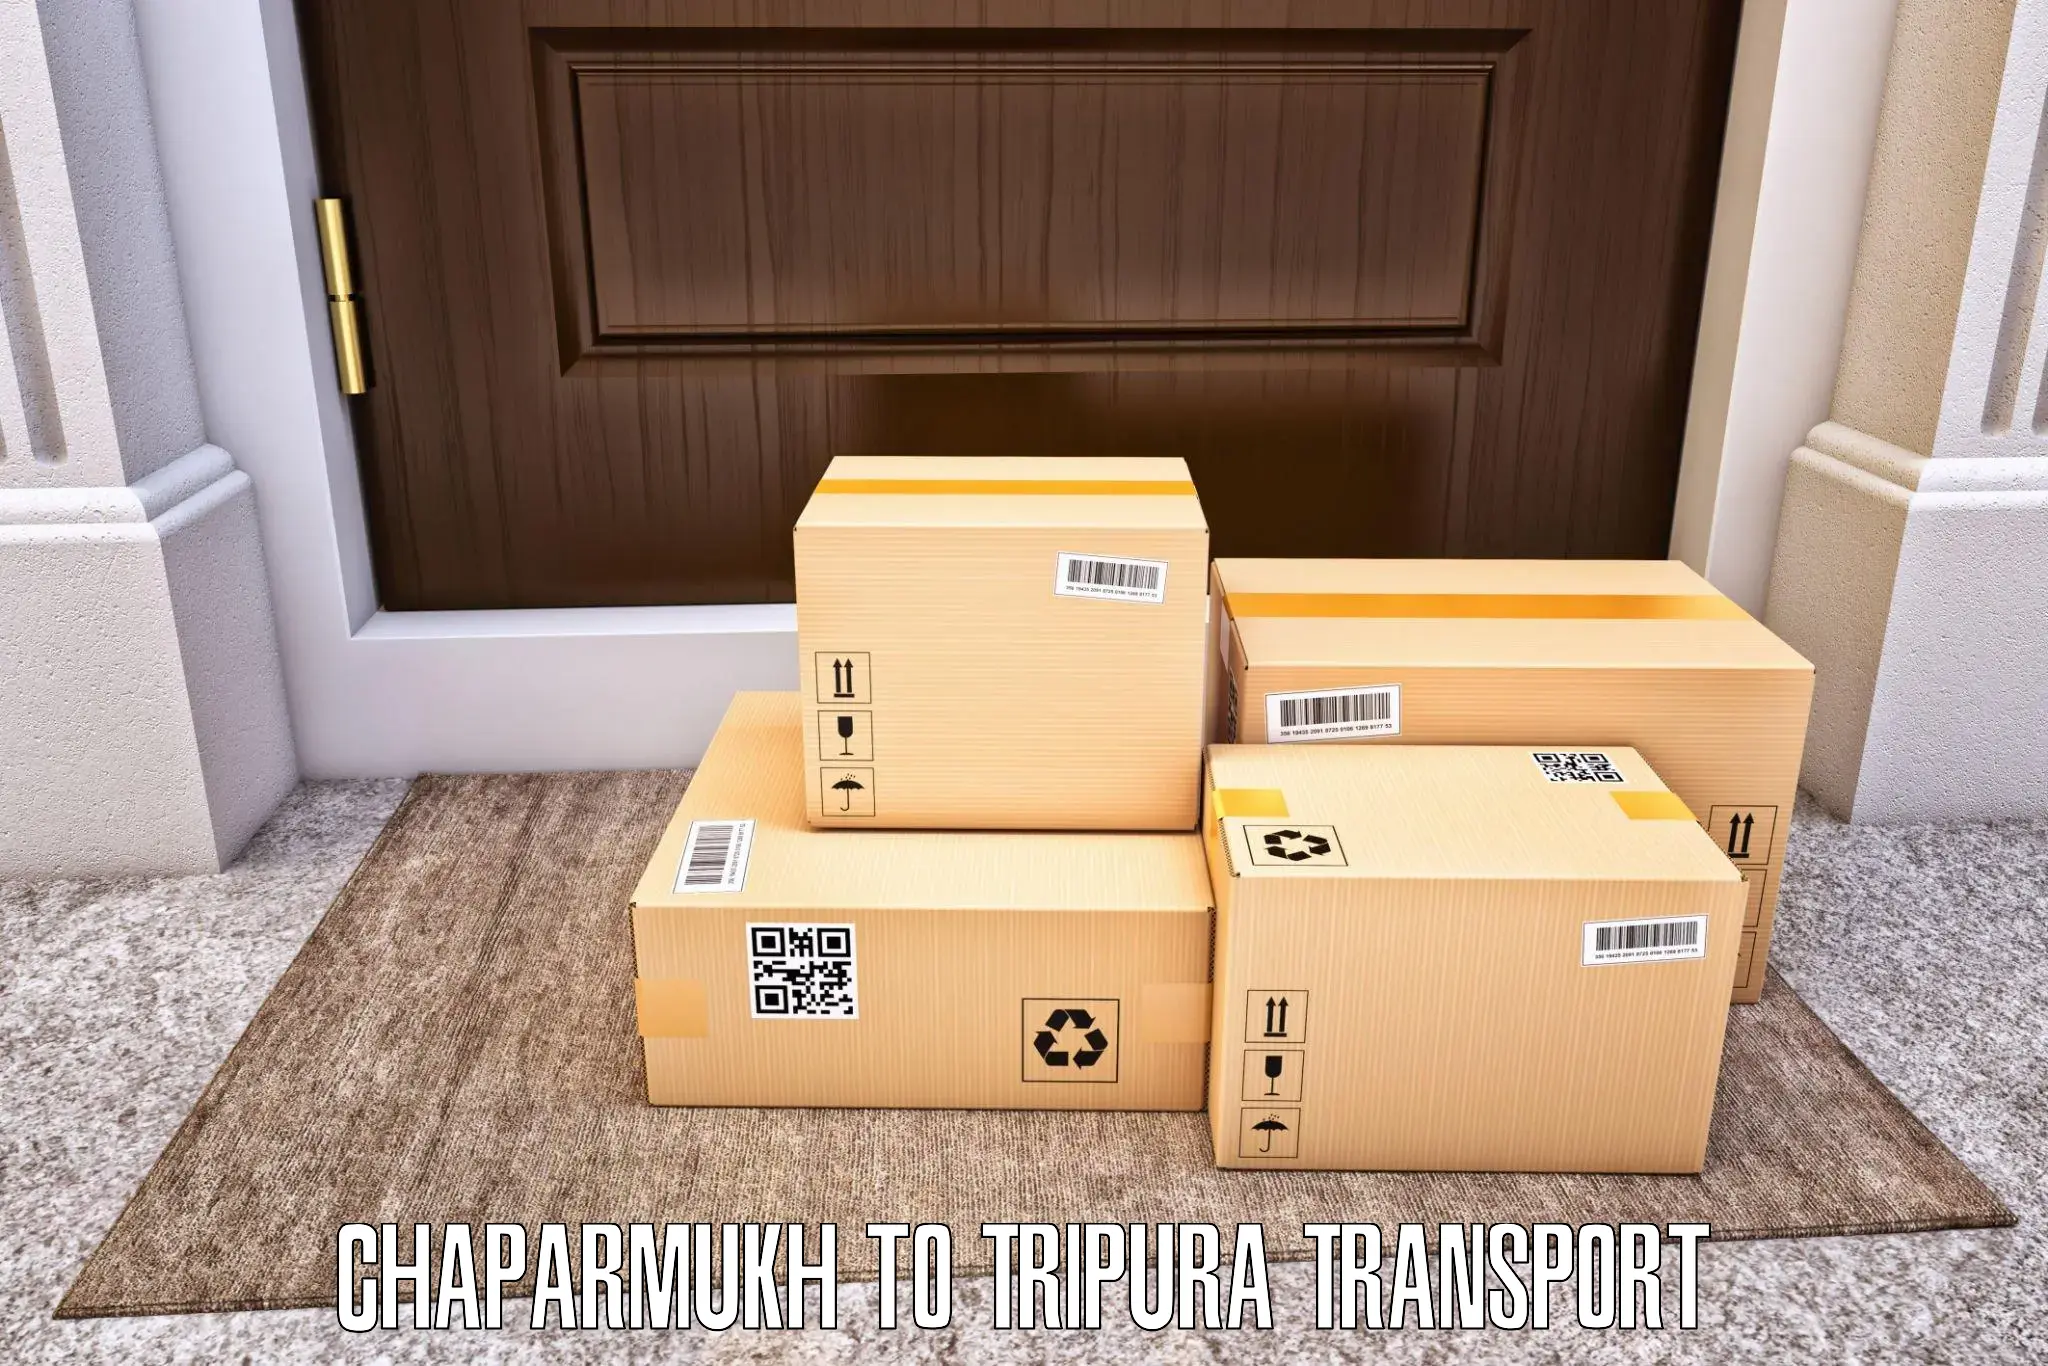 Truck transport companies in India Chaparmukh to Santirbazar